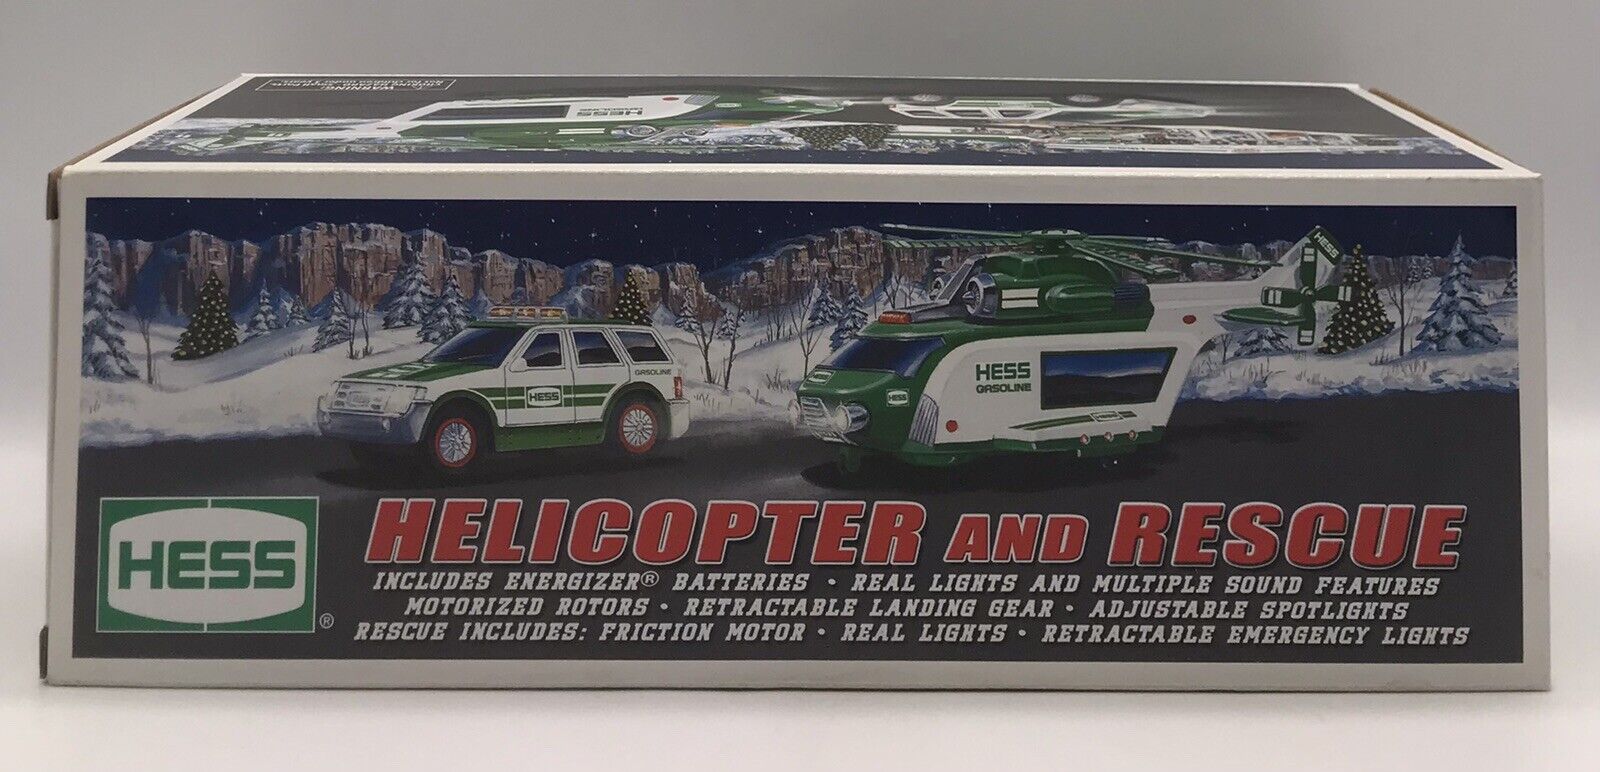 Hess Collectible 2012 Toy Helicopter And Rescue Truck. Brand New-In Box